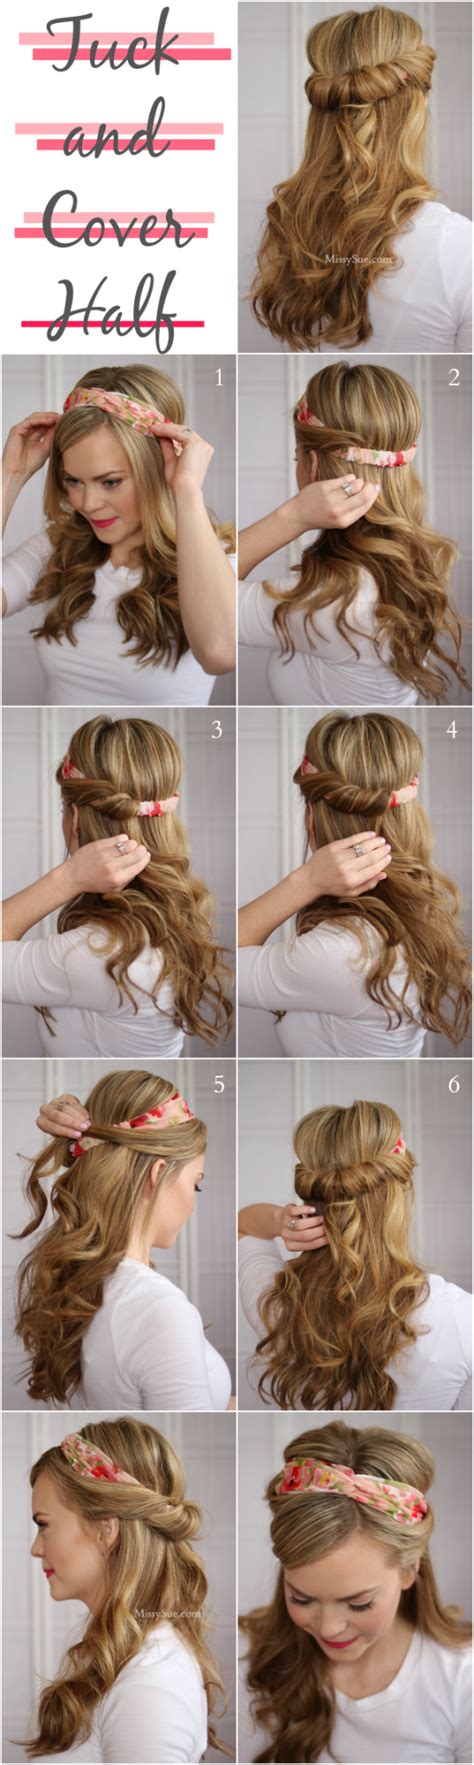 18 Cute And Easy Hairstyles That Can Be Done In 10 Minutes Style